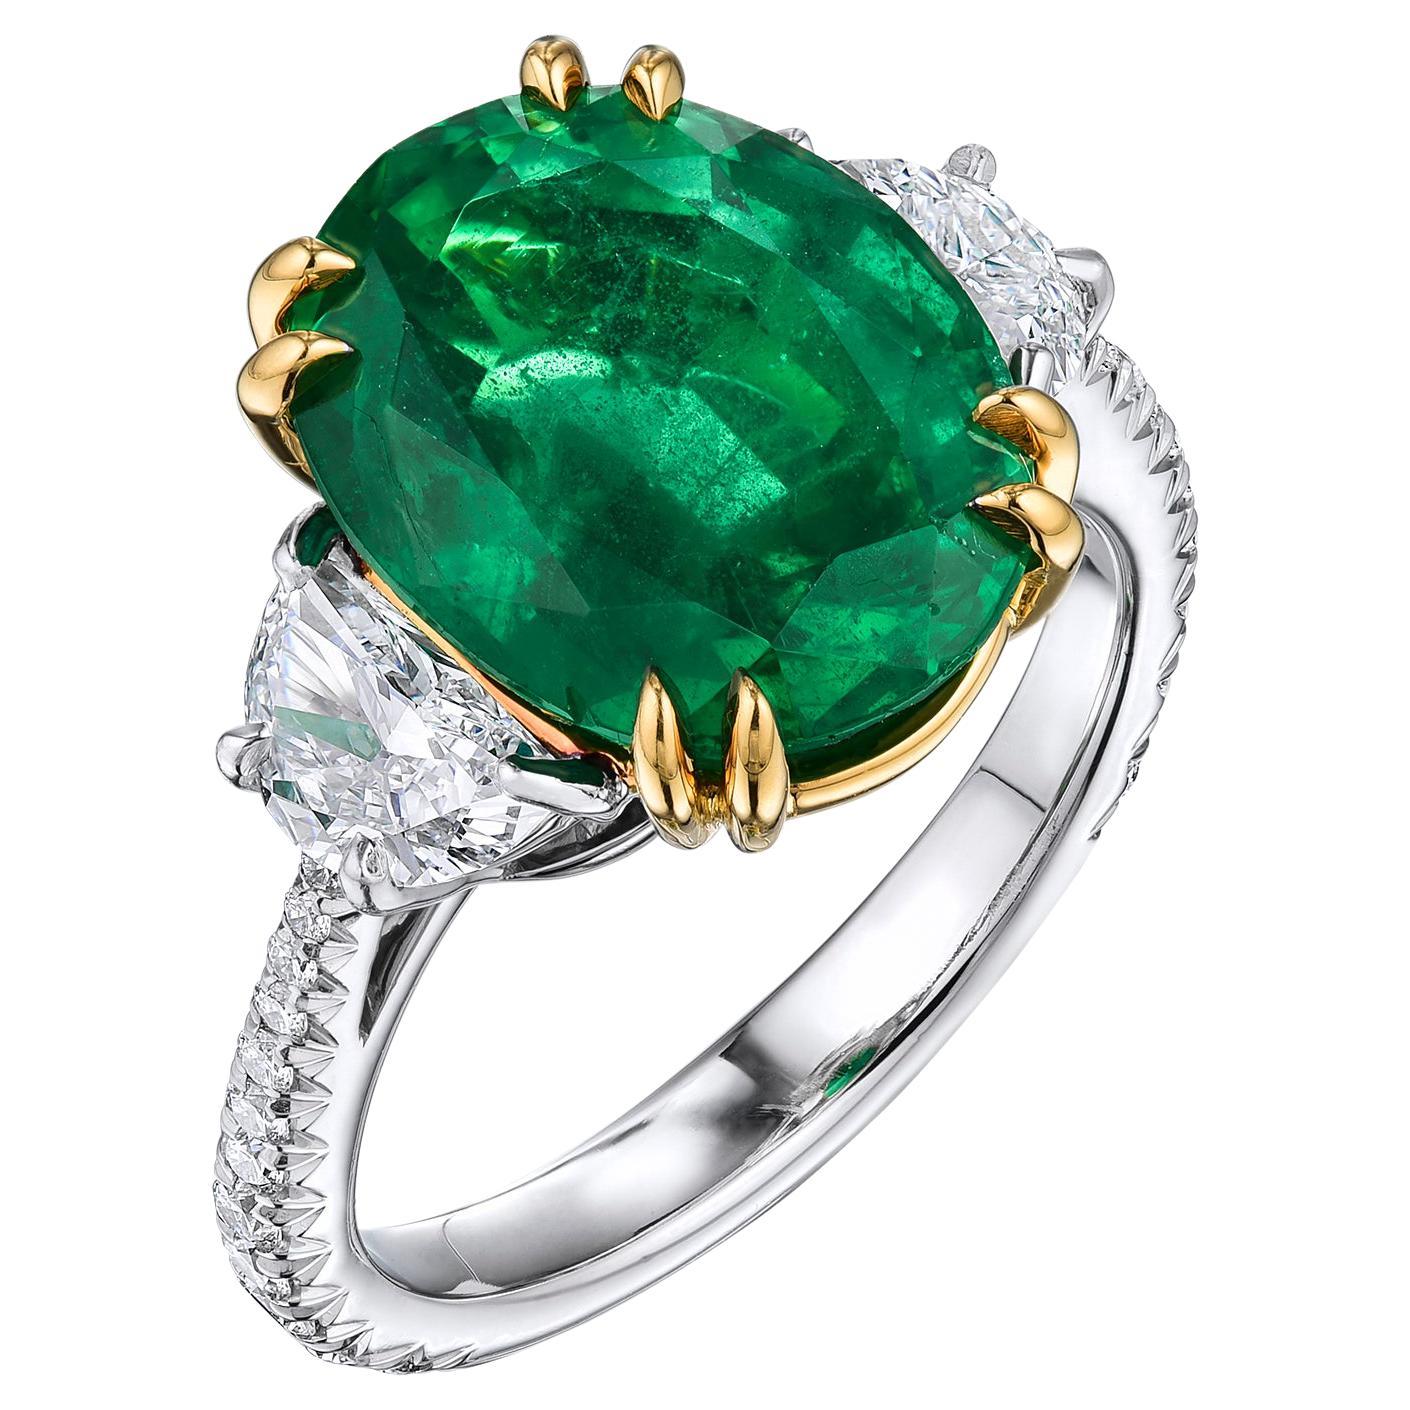 GIA Certified Oval 5.72 Ct Green Emerald Platinum Cocktail Ring 